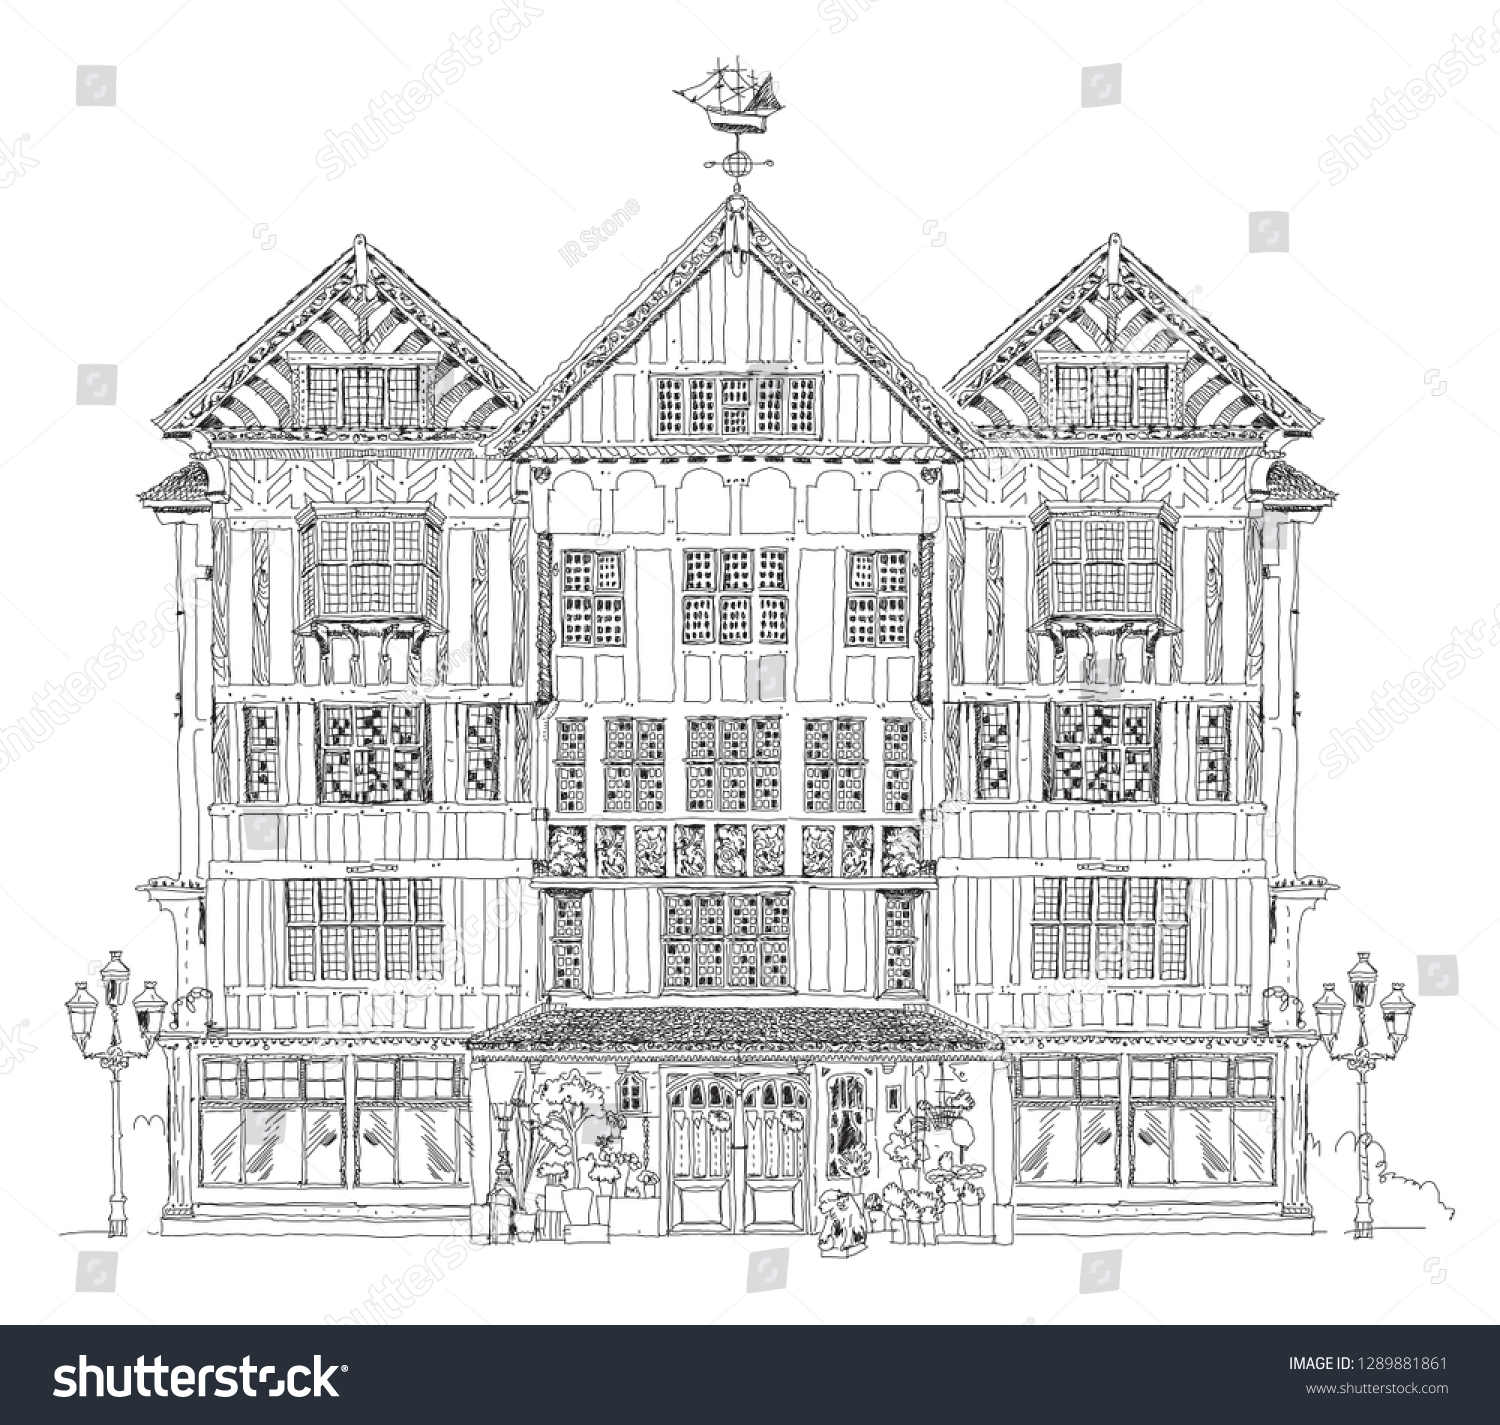 SVG of English house. Traditional architecture of the 18th century based of medieval tradition. Sketch collection. svg